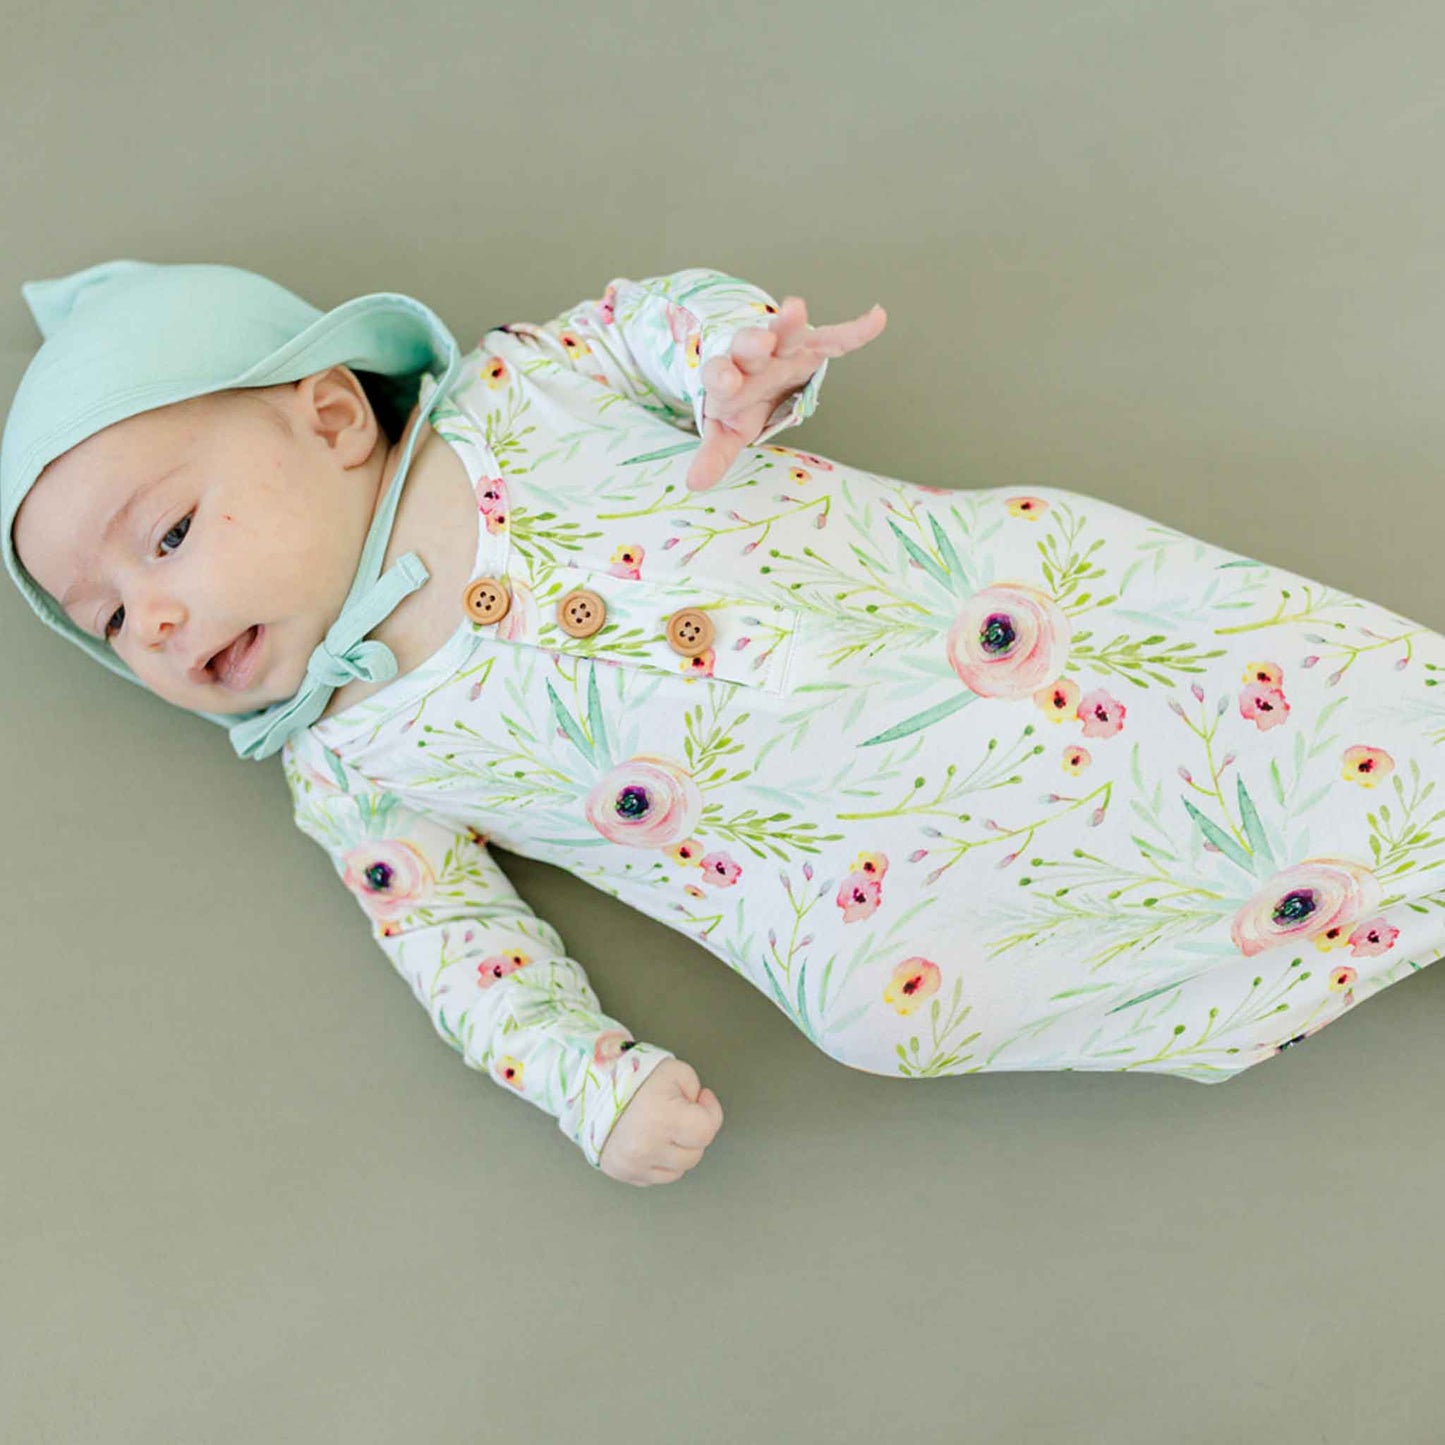 Dolly Lana - Knotted baby gown - Floral Kiss